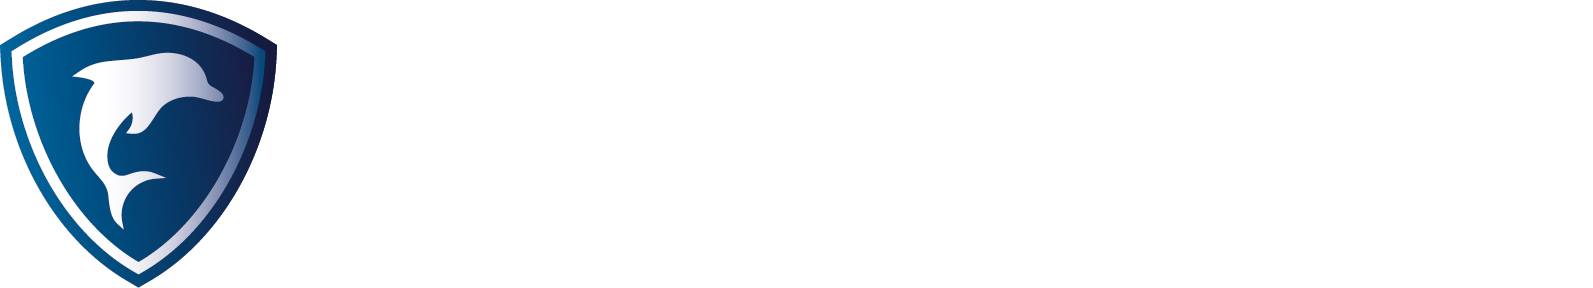 HM - Security Protect